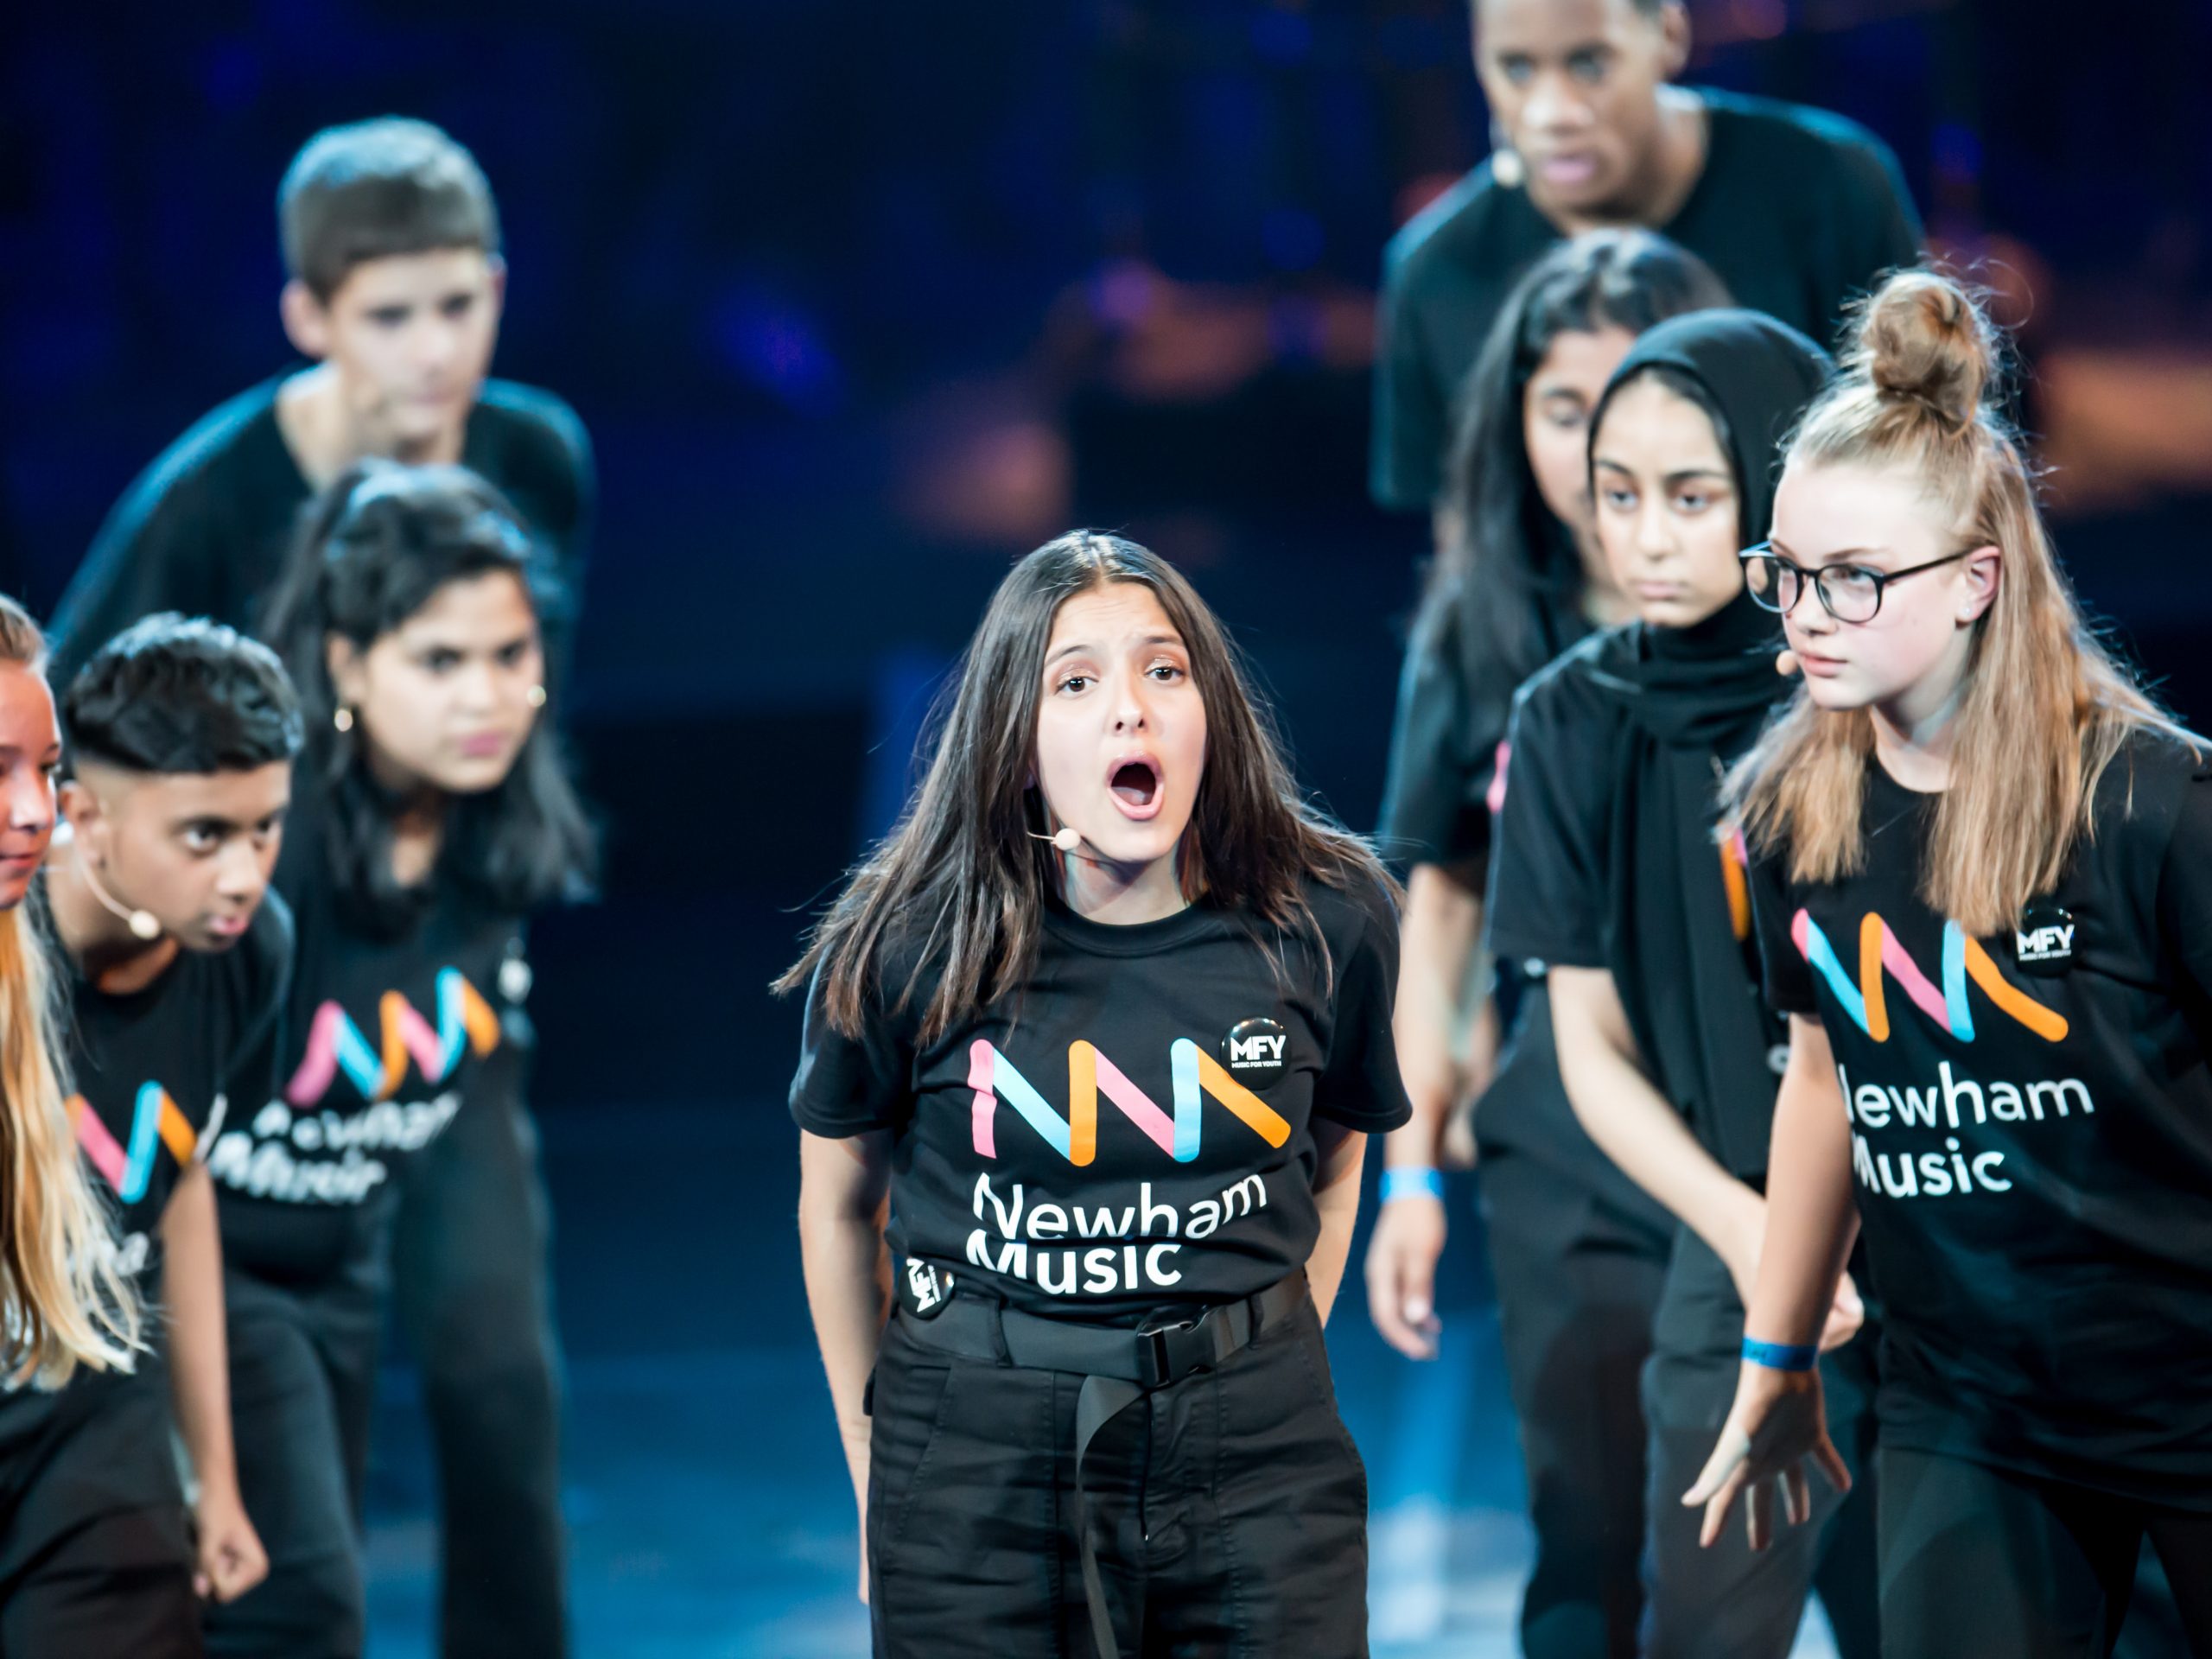 A group of young people on stage, wearing Newham Music tshirts